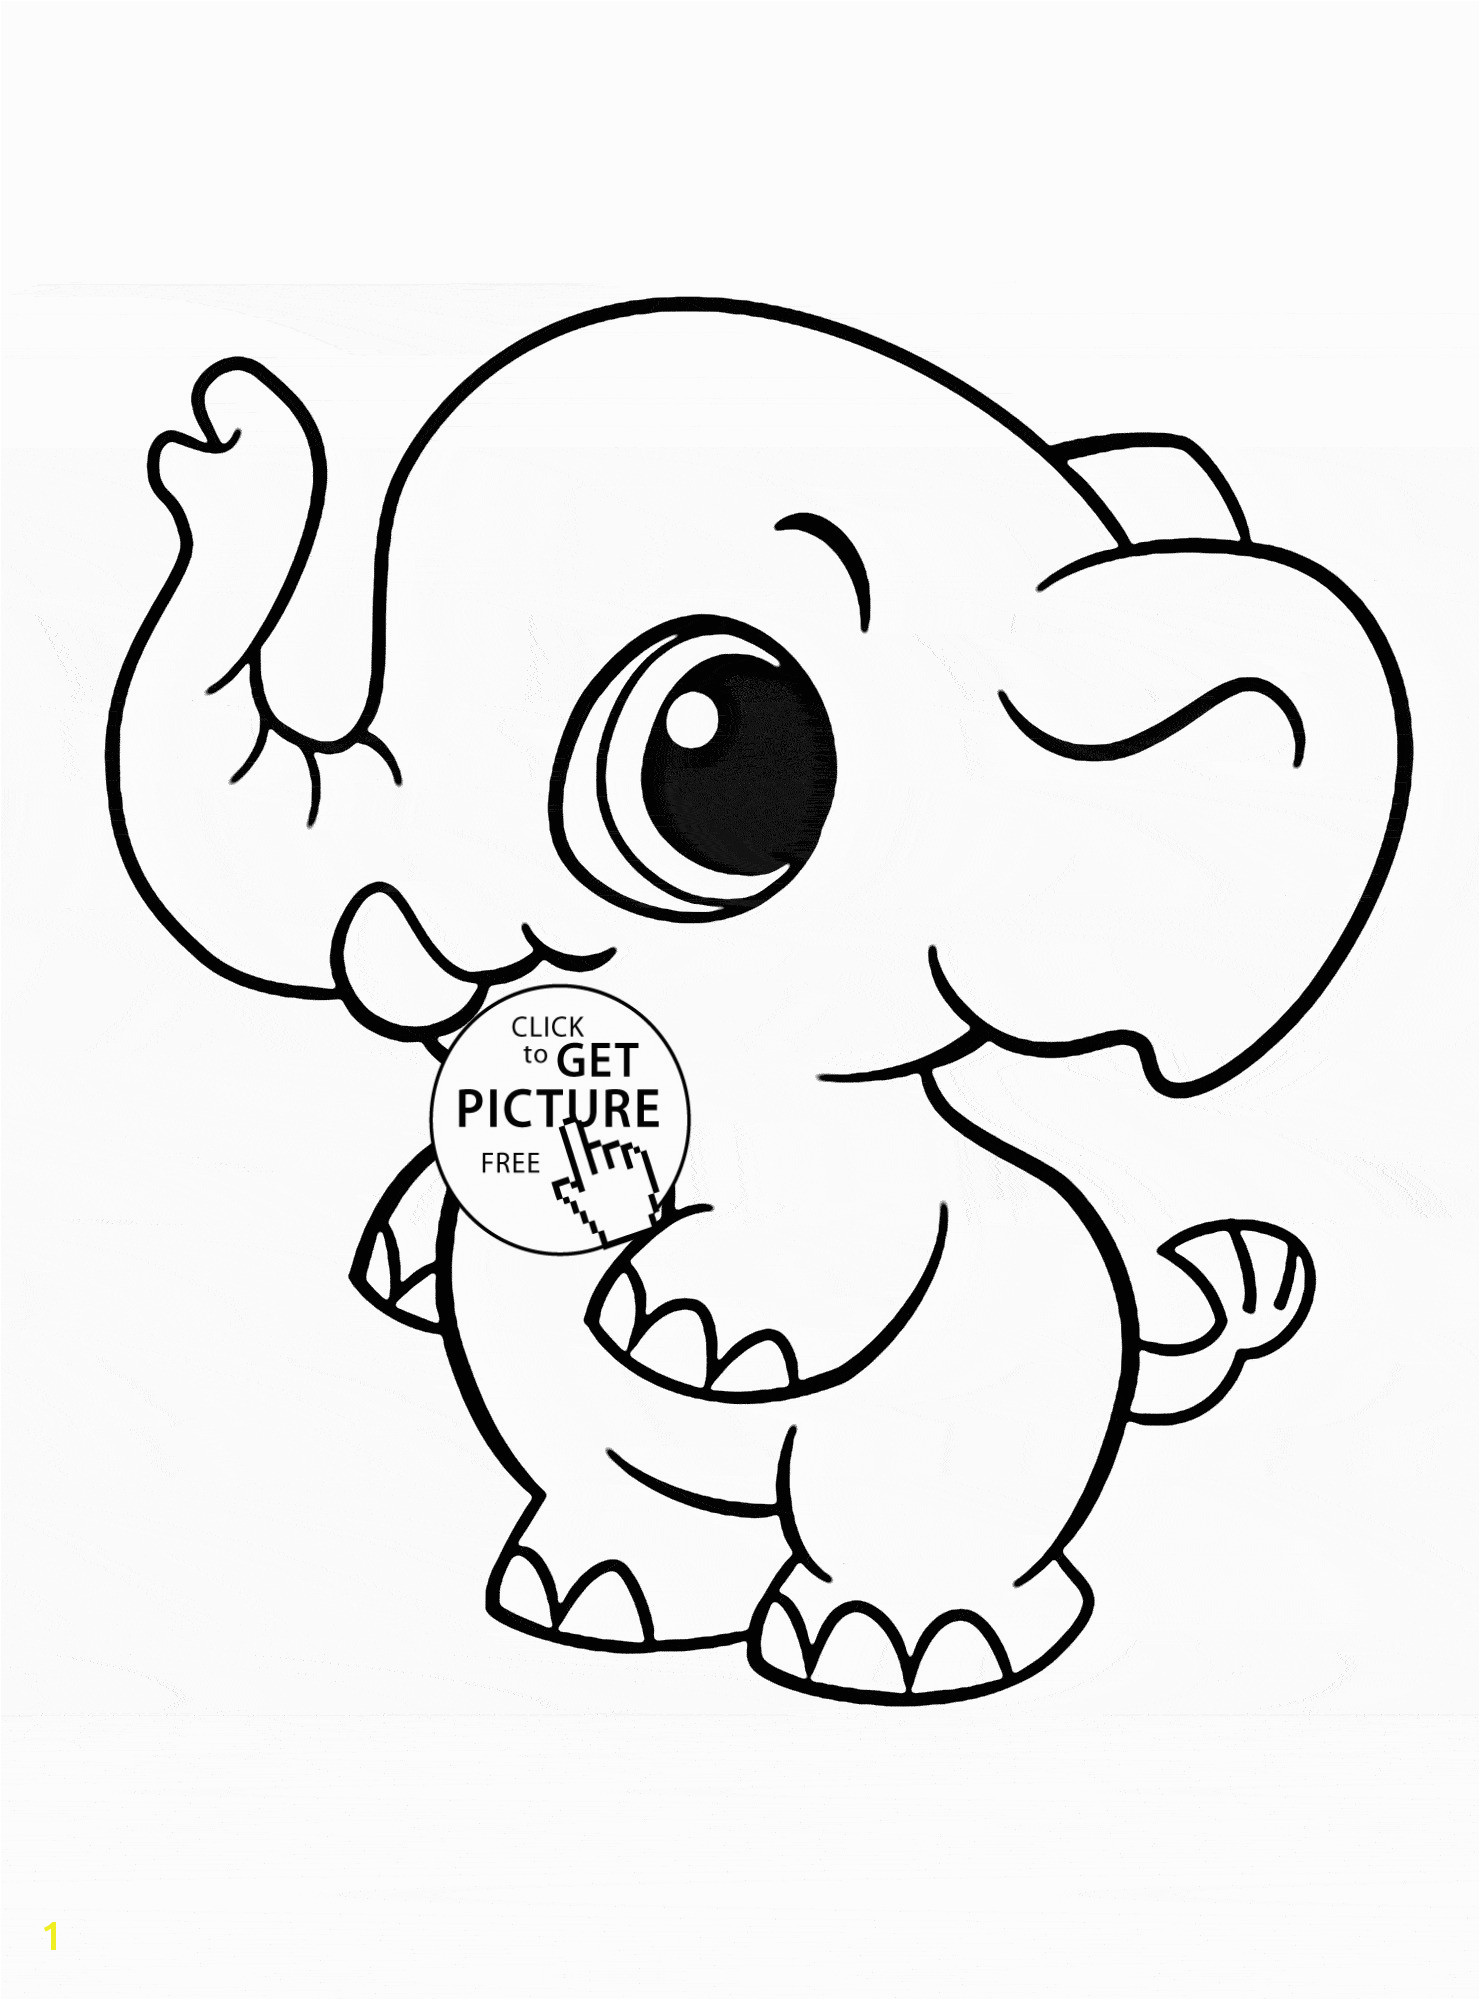 Coloring Pages Printing Elephant Coloring Pages Printable Elephant Coloring Pages Unique Color Page New Children